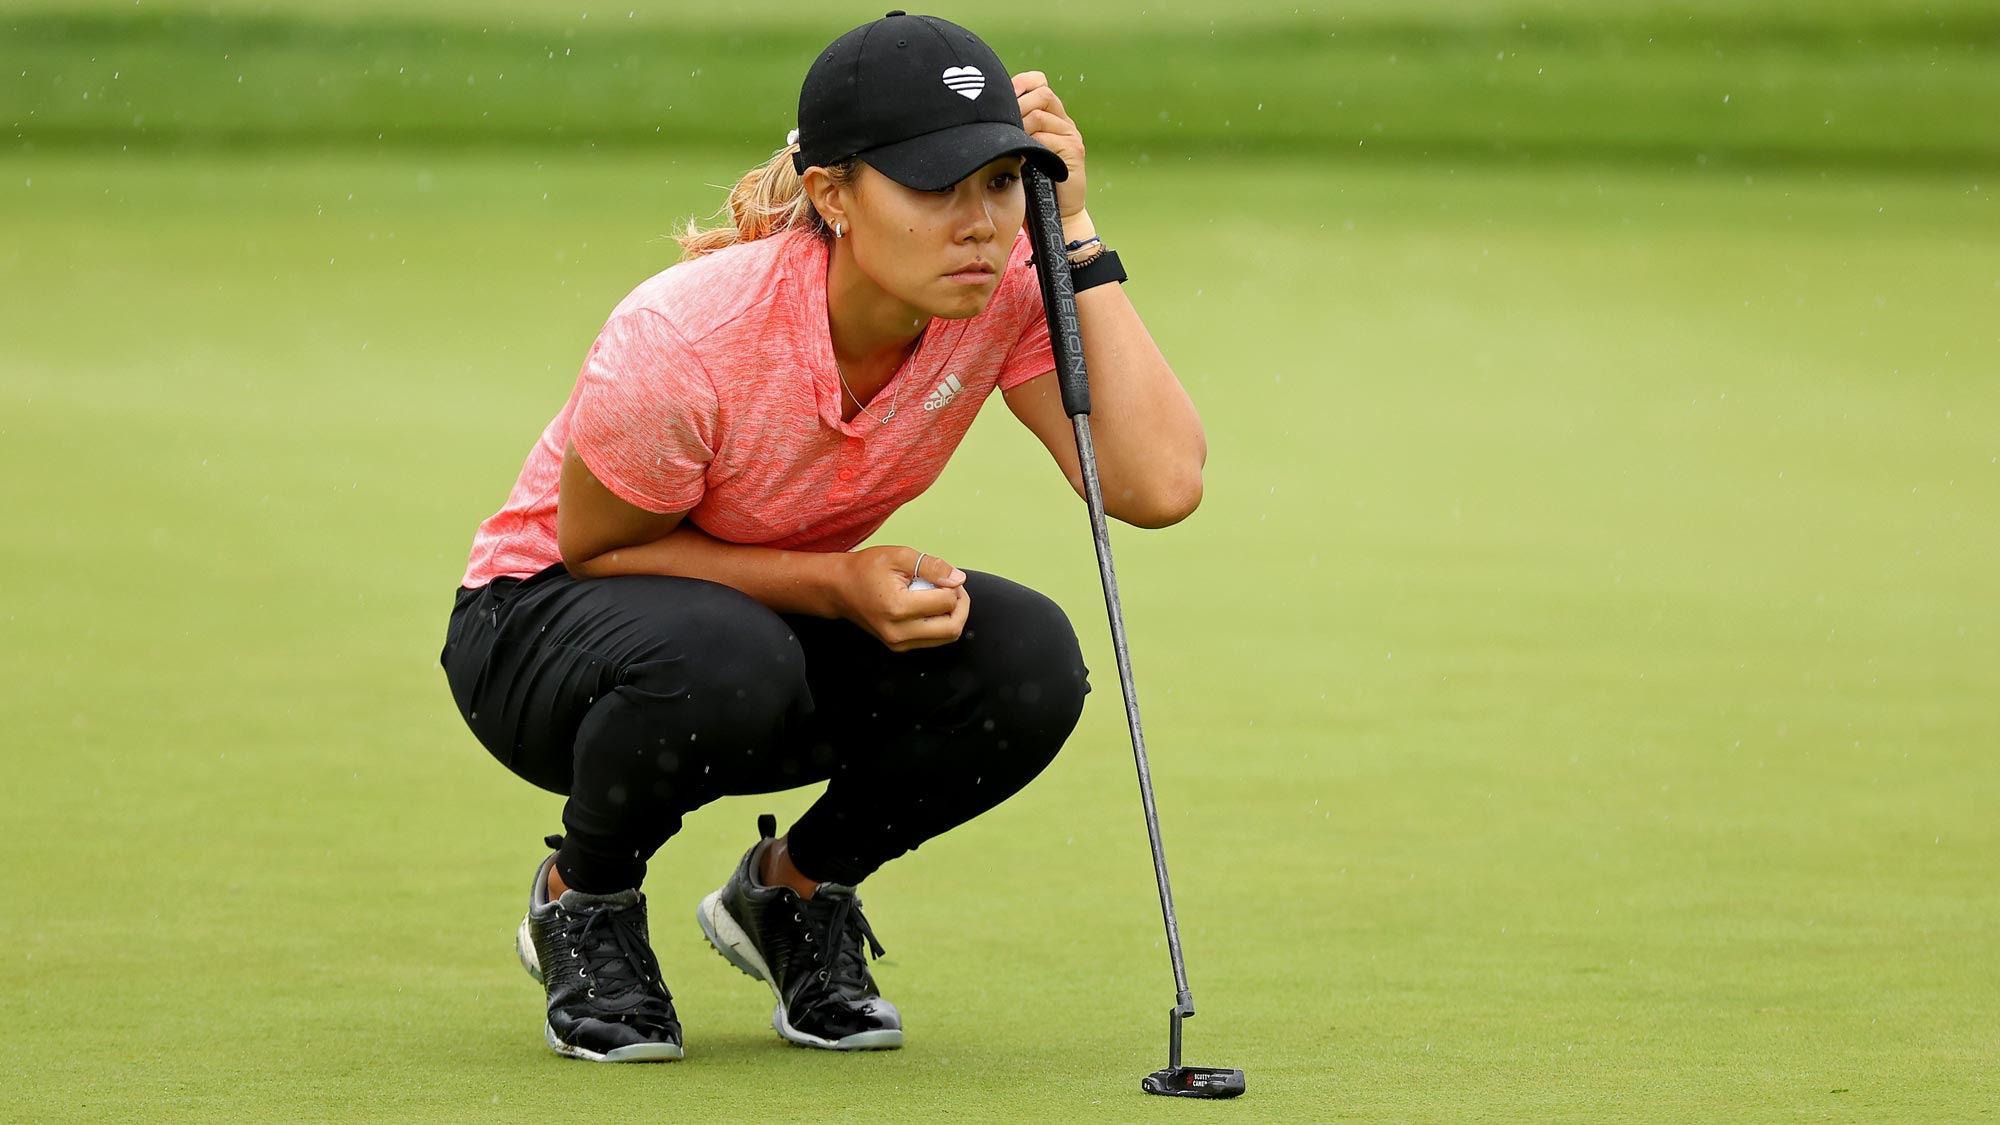 Danielle Kang lines up a putt on the second green during the second round of the LPGA Drive On Championship